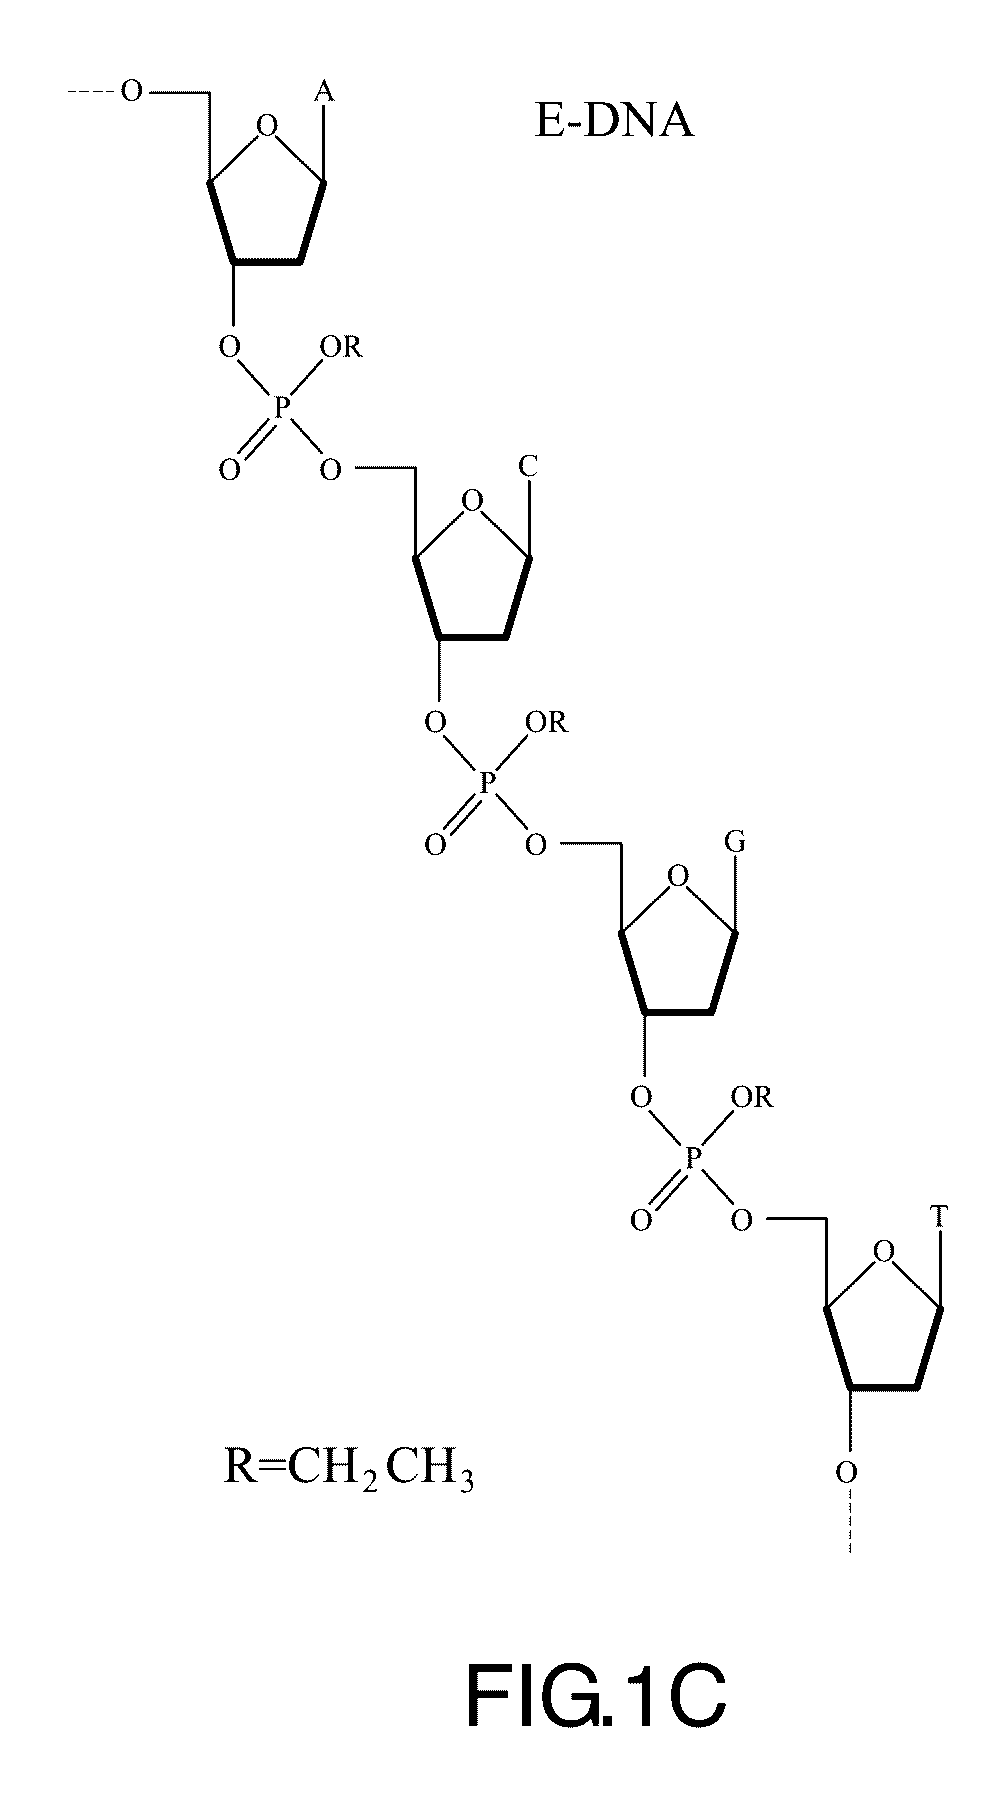 Method of using neutrilized DNA (N-DNA) as surface probe for high throughput detection platform